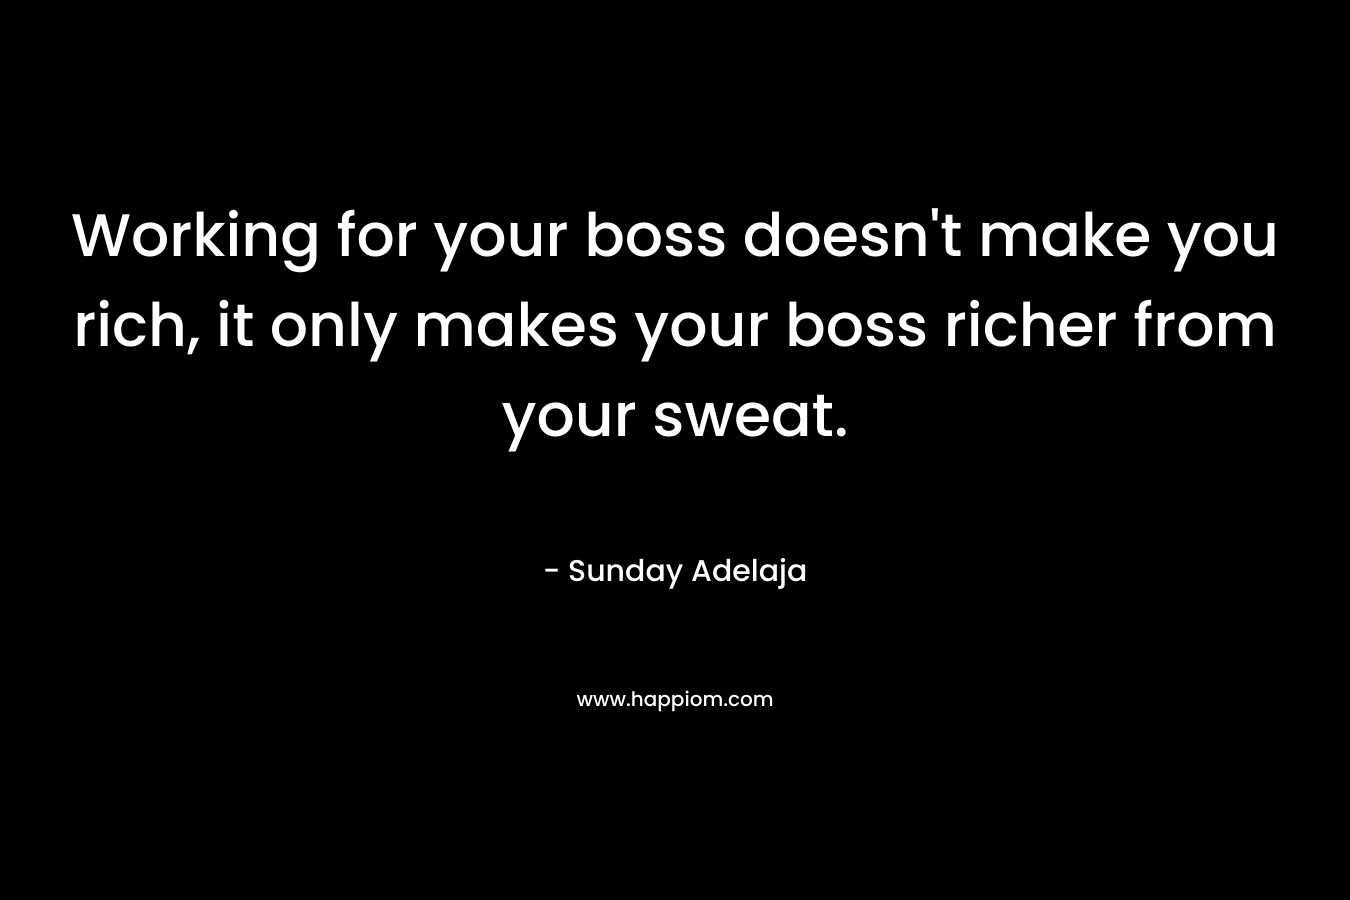 Working for your boss doesn't make you rich, it only makes your boss richer from your sweat.